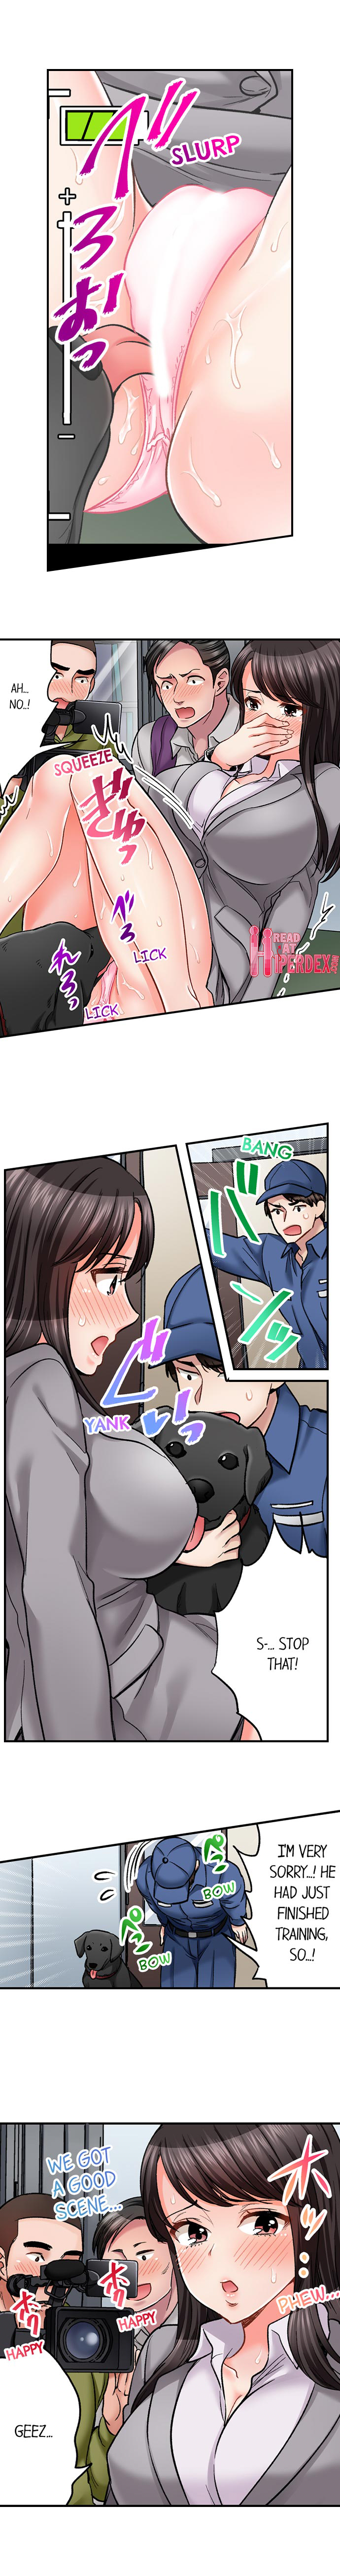 Sex is Part of Undercover Agent’s Job? - Chapter 31 Page 6